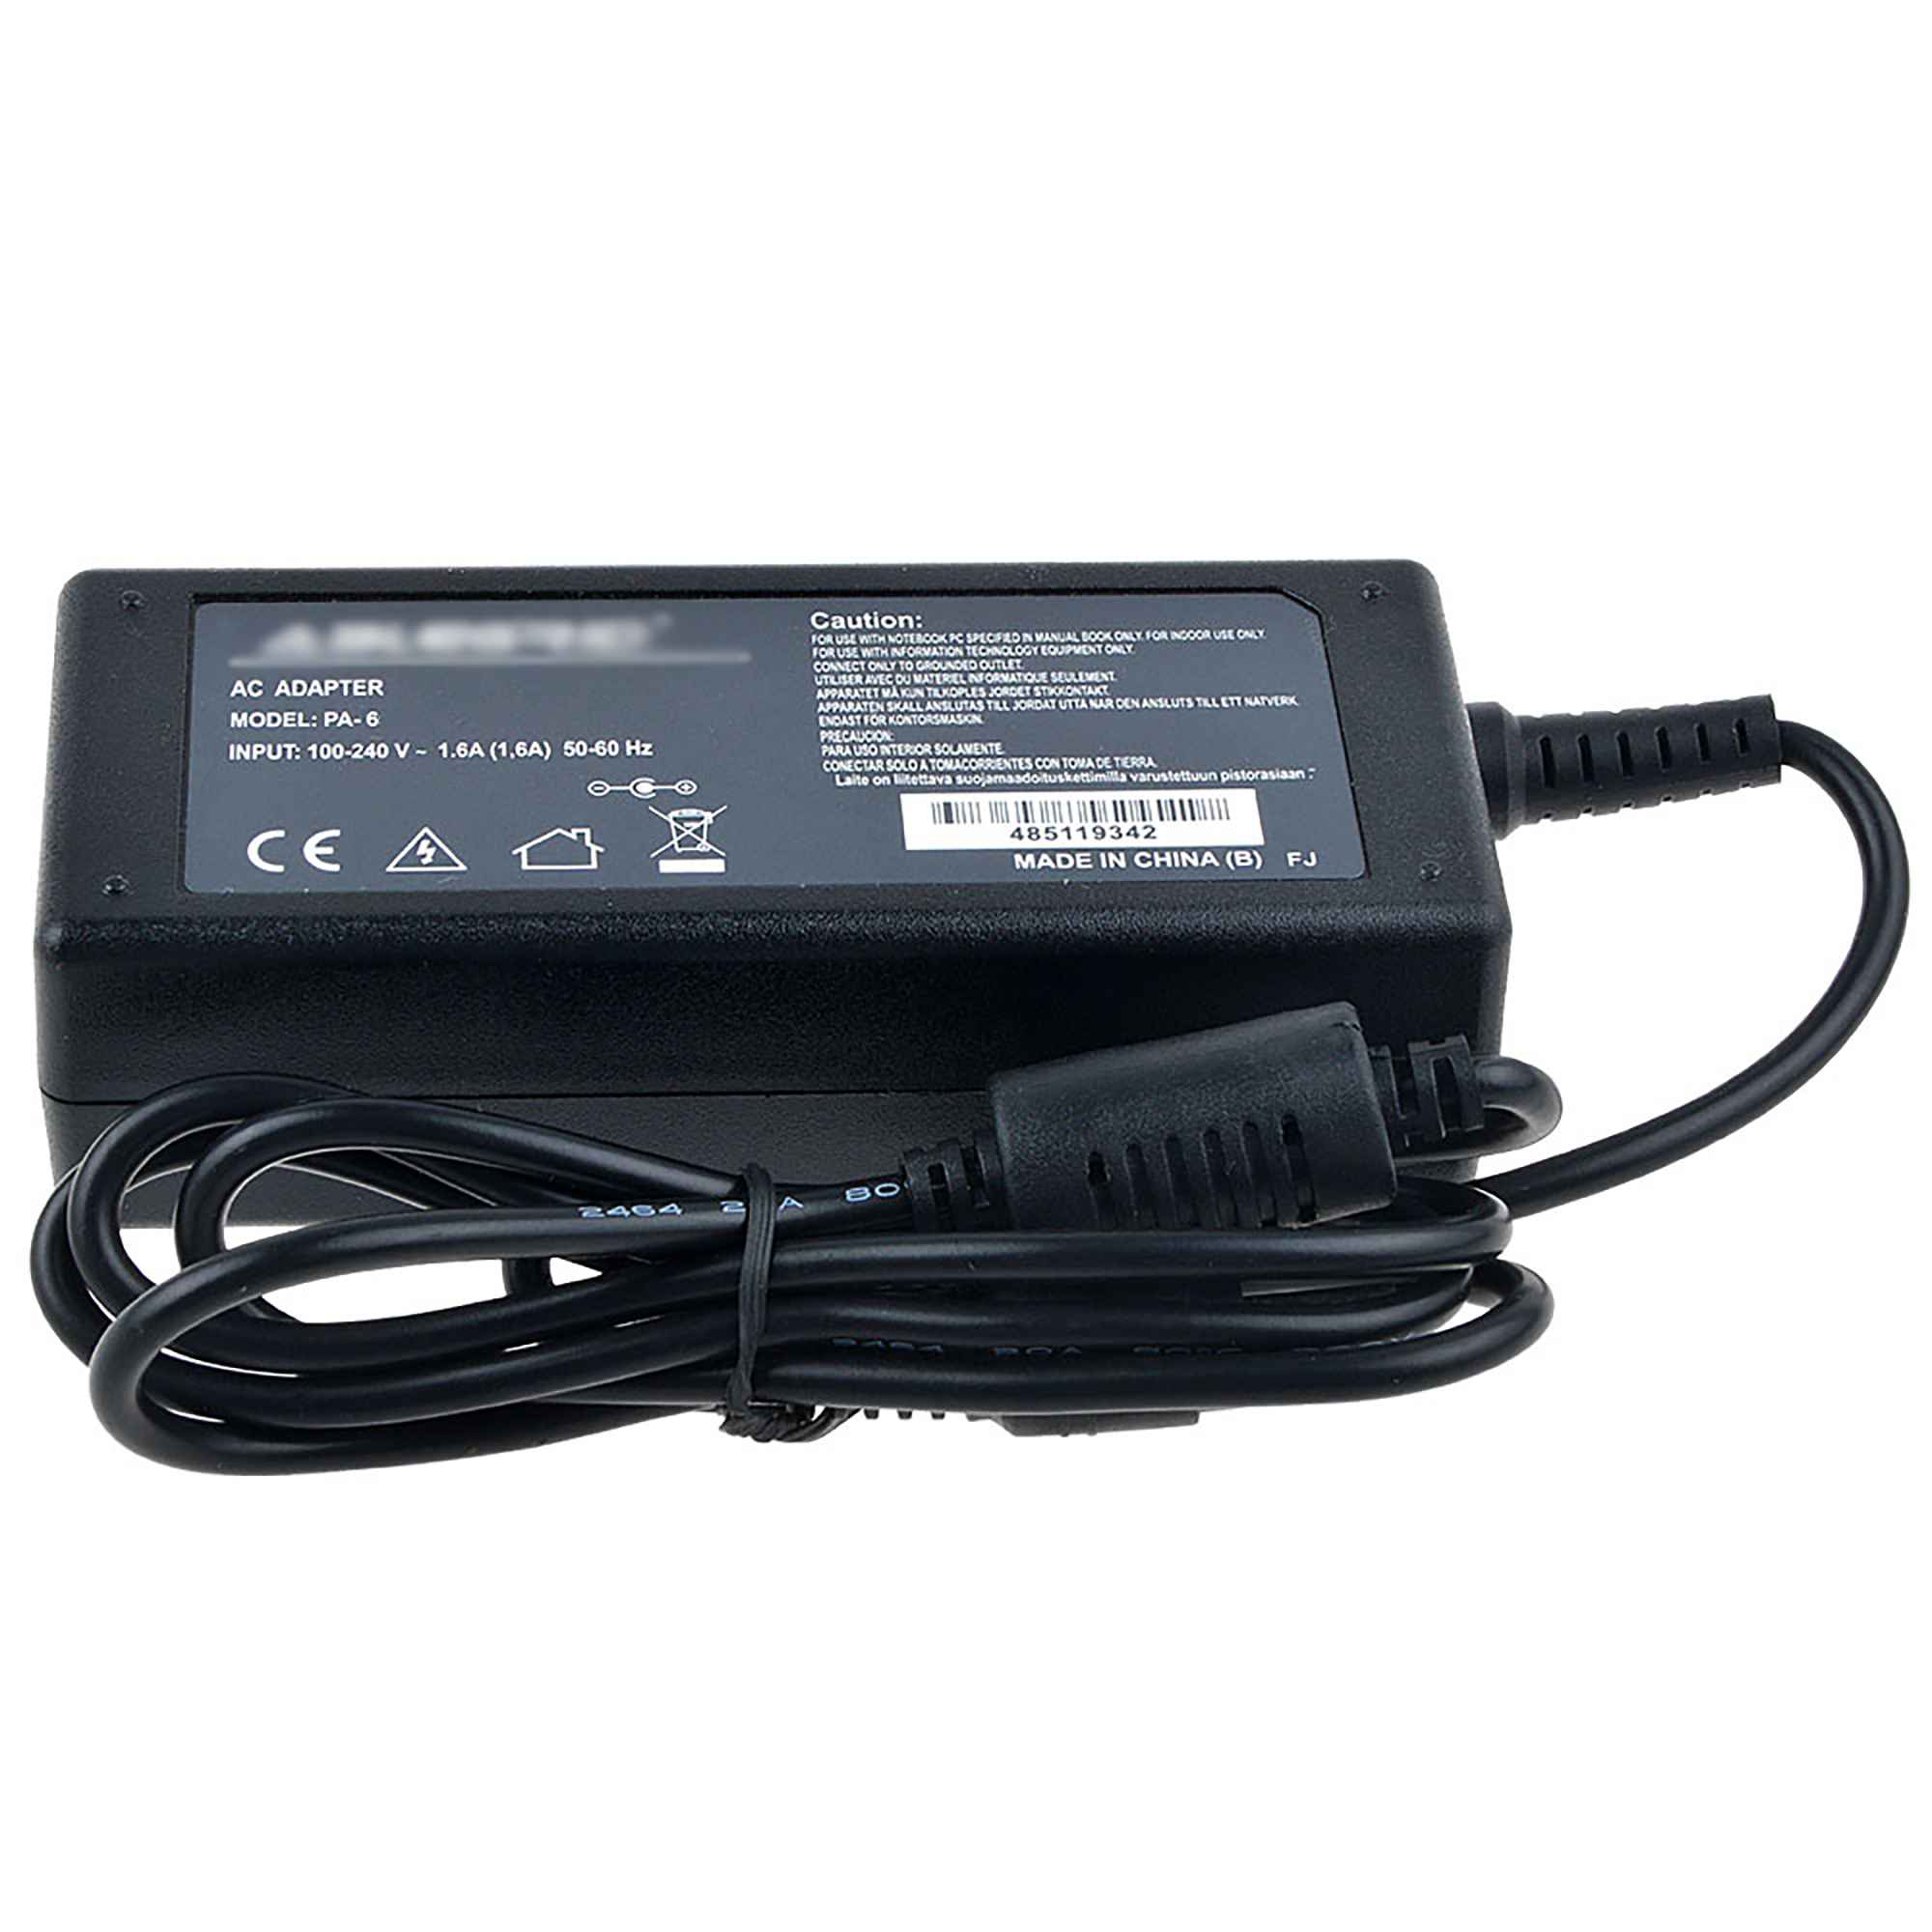 PKPOWER 16V 2.5A AC DC Adapter for ScanSnap SV600 FI-SV600 FI-SV600A FI-SV600A-P PA03641-B305 fi-7030 PA03750-B005 PA03750-B001 N7100 PA03706-B205 Scanner, FMC-AC313S Power Supply - image 3 of 5